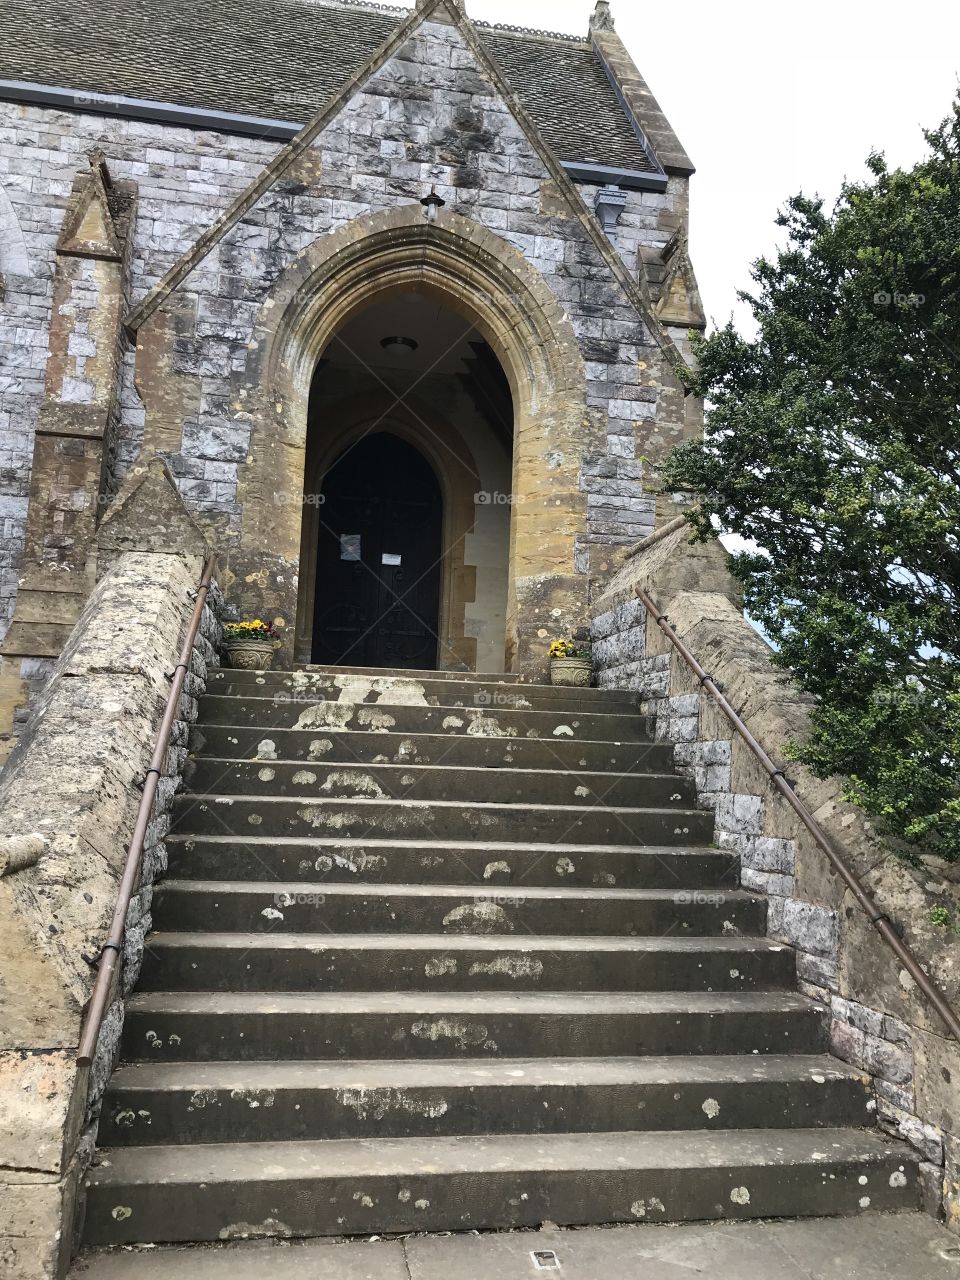 Entrance to the local Otterton Church, the steps leading to the entrance look significant.